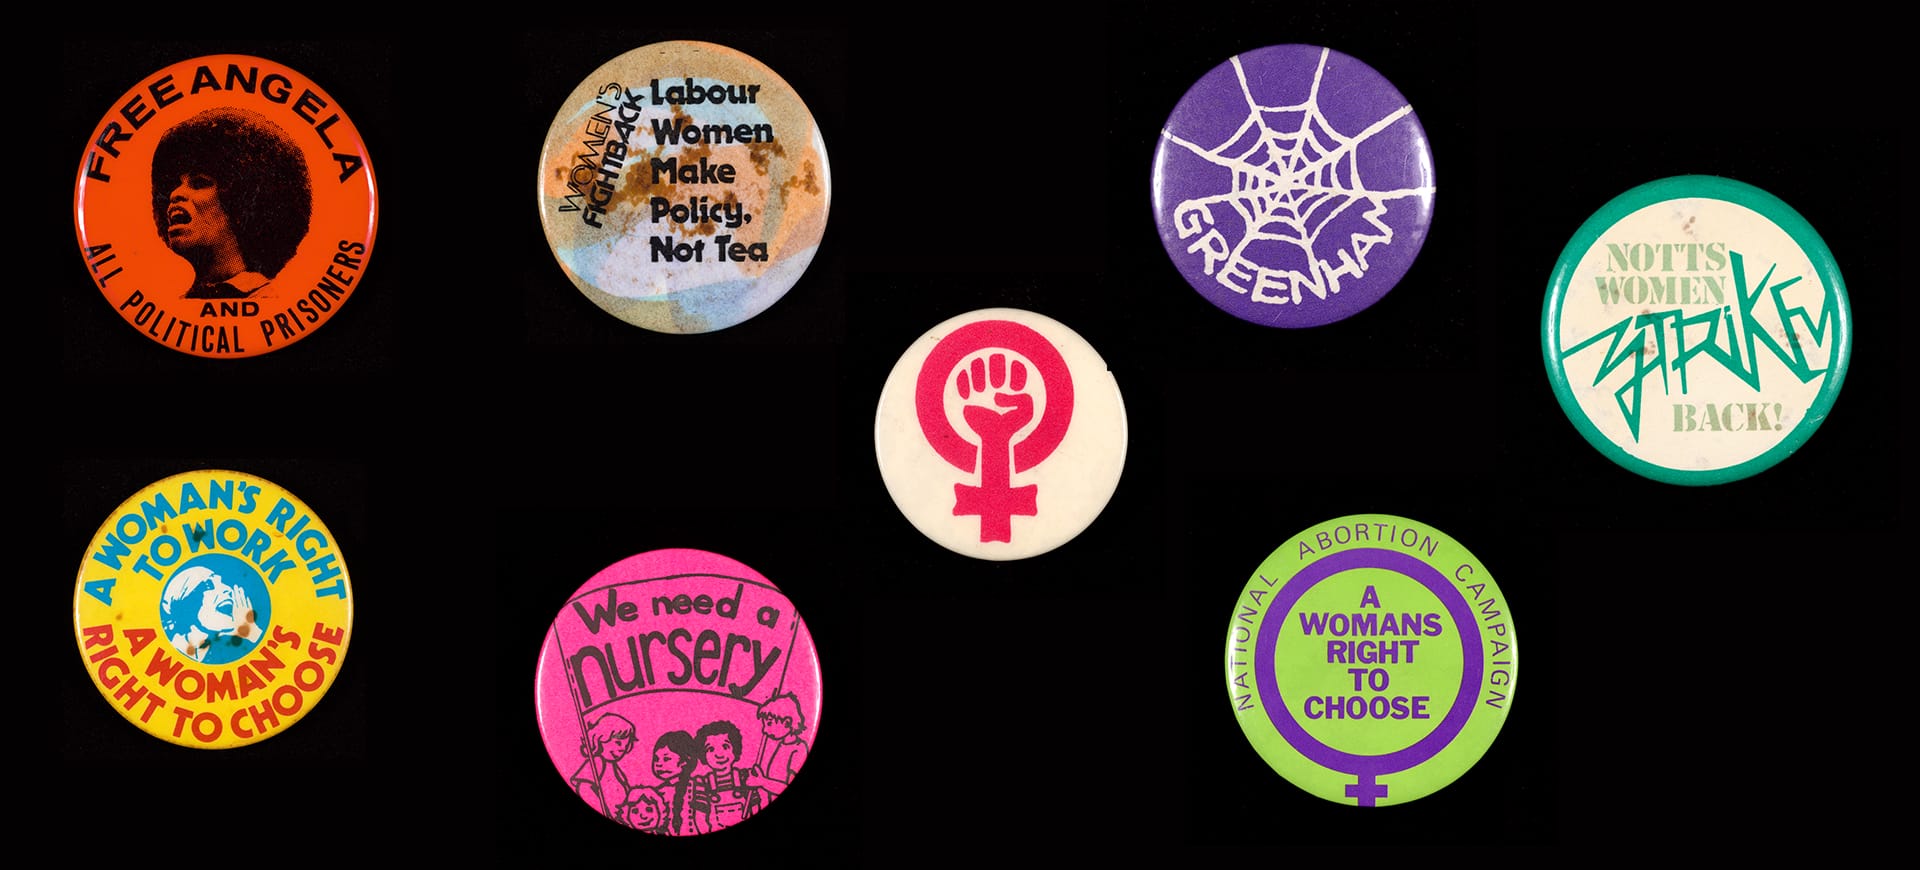 A collection of feminist badges on a black table